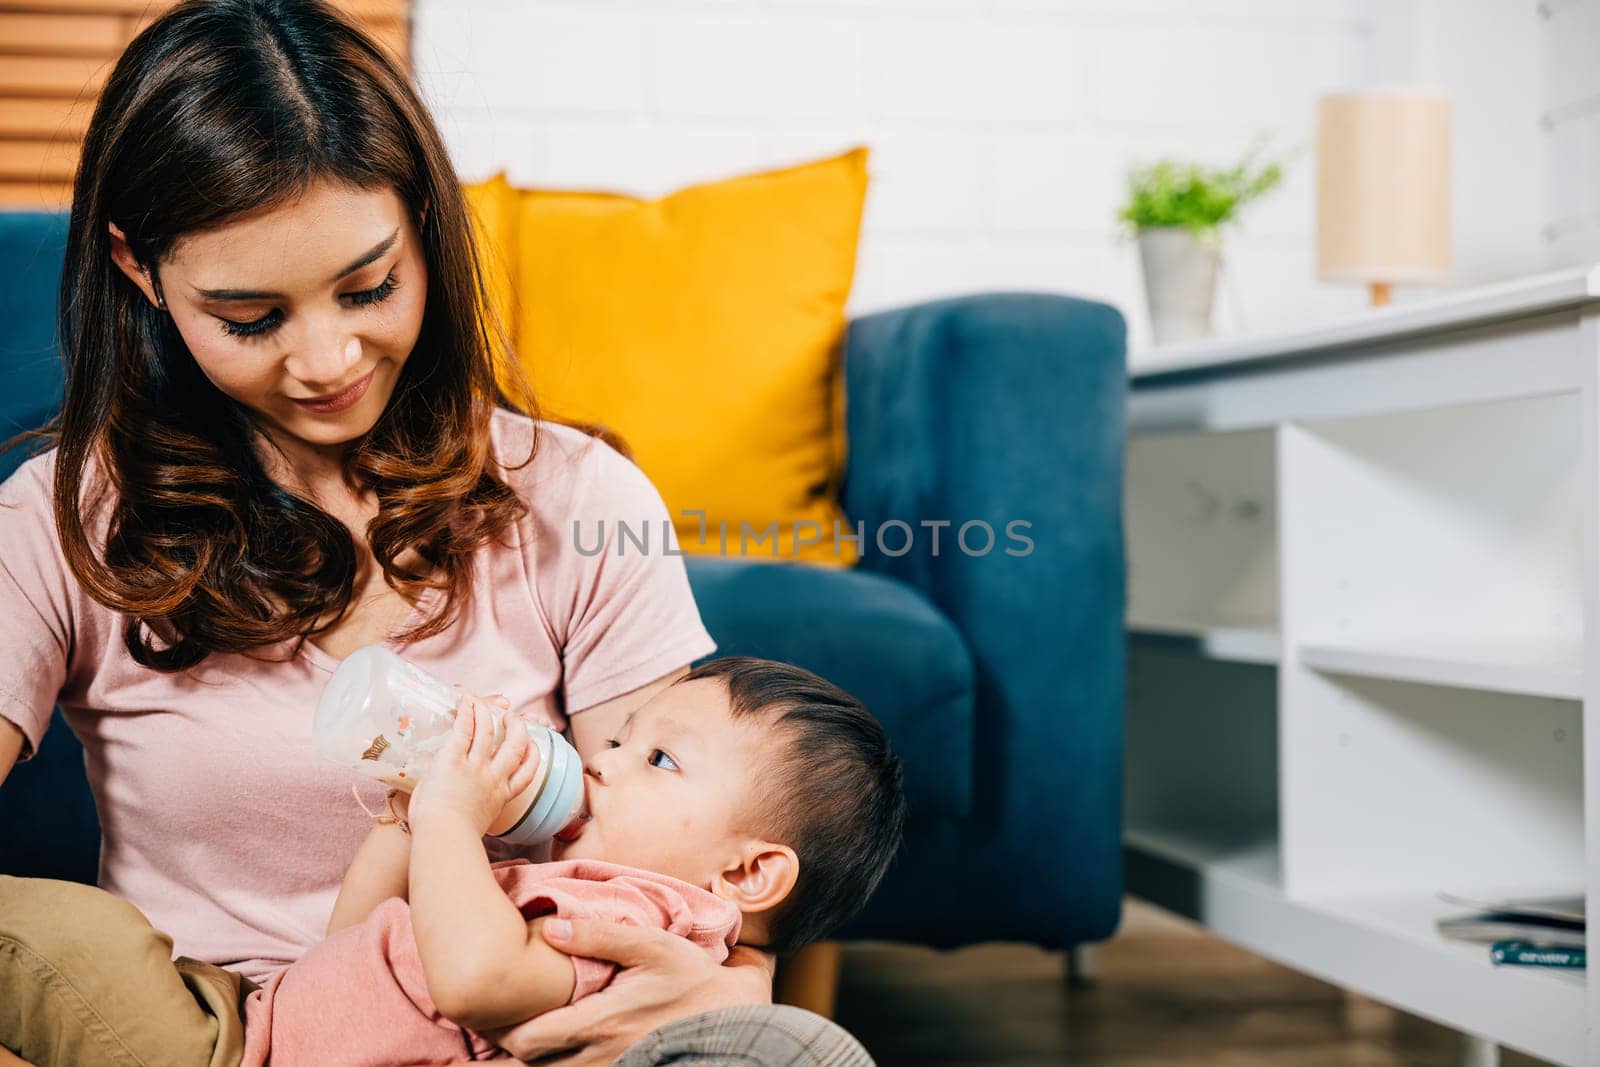 A heartwarming family portrait comes to life in the living room at home as a smiling mother holds her cute Asian baby who is feeding from a baby bottle radiating joy and togetherness in every glance.